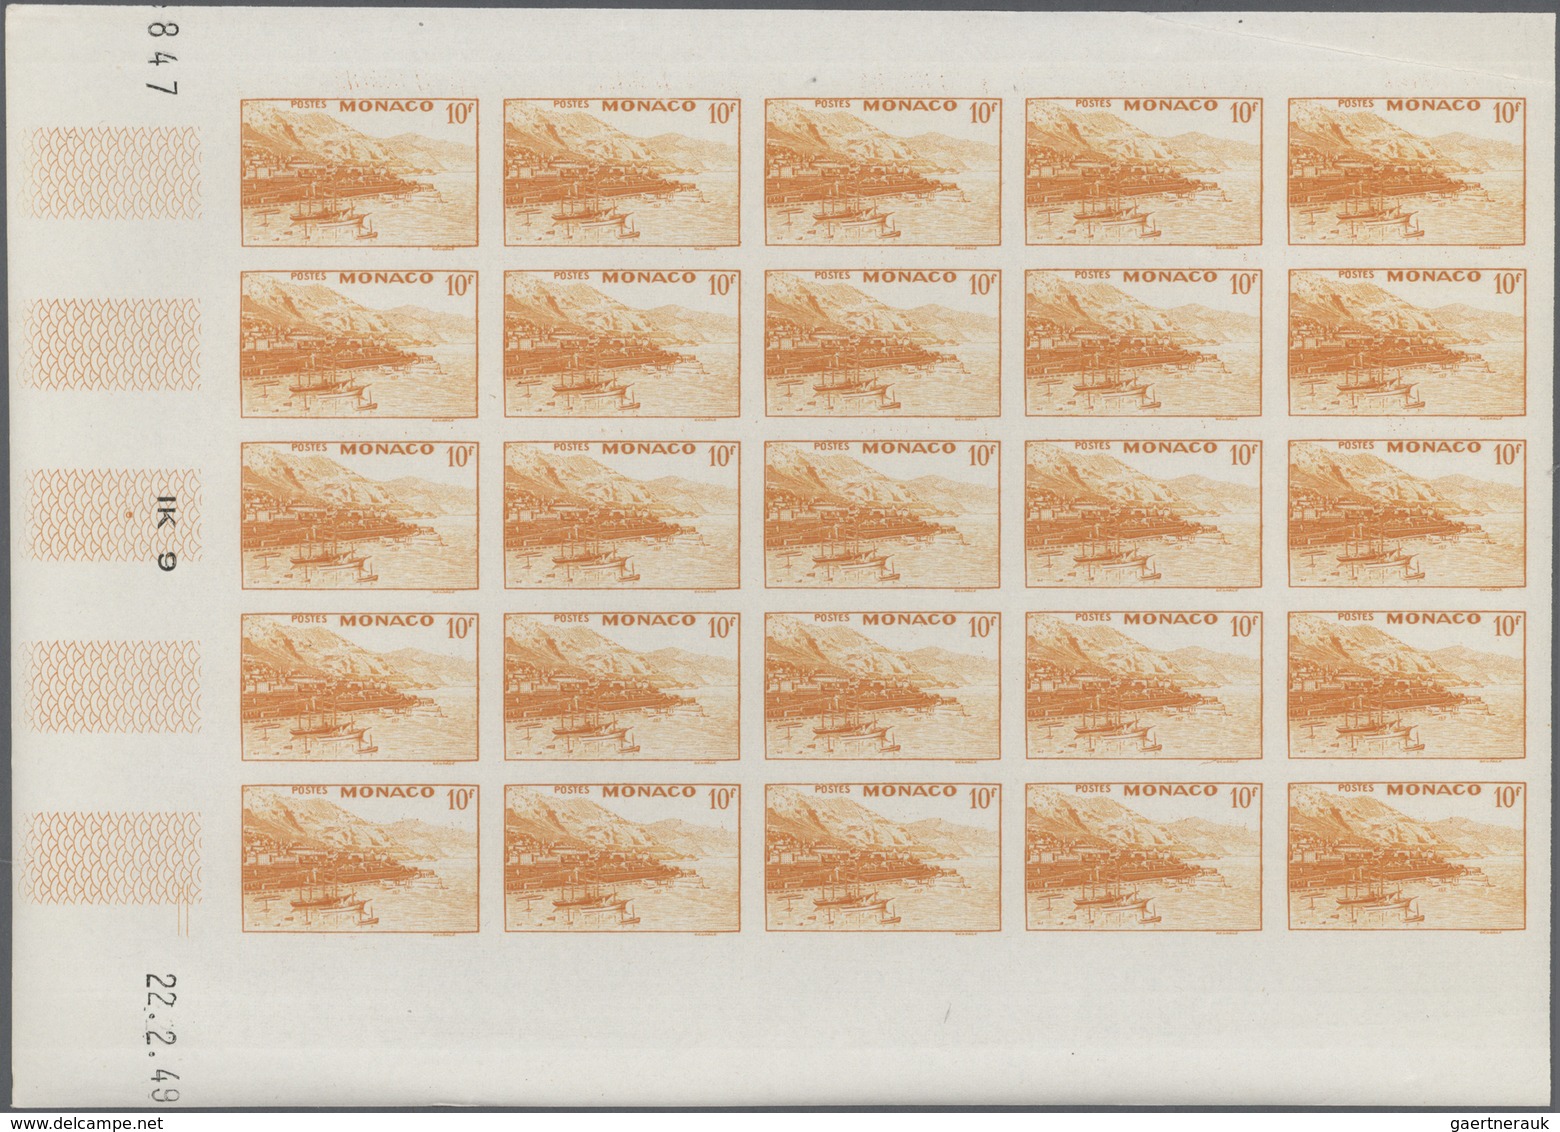 Monaco: 1948/1949, pictorial definitives complete set of 13 in IMPERFORATE blocks of 25 from lower m